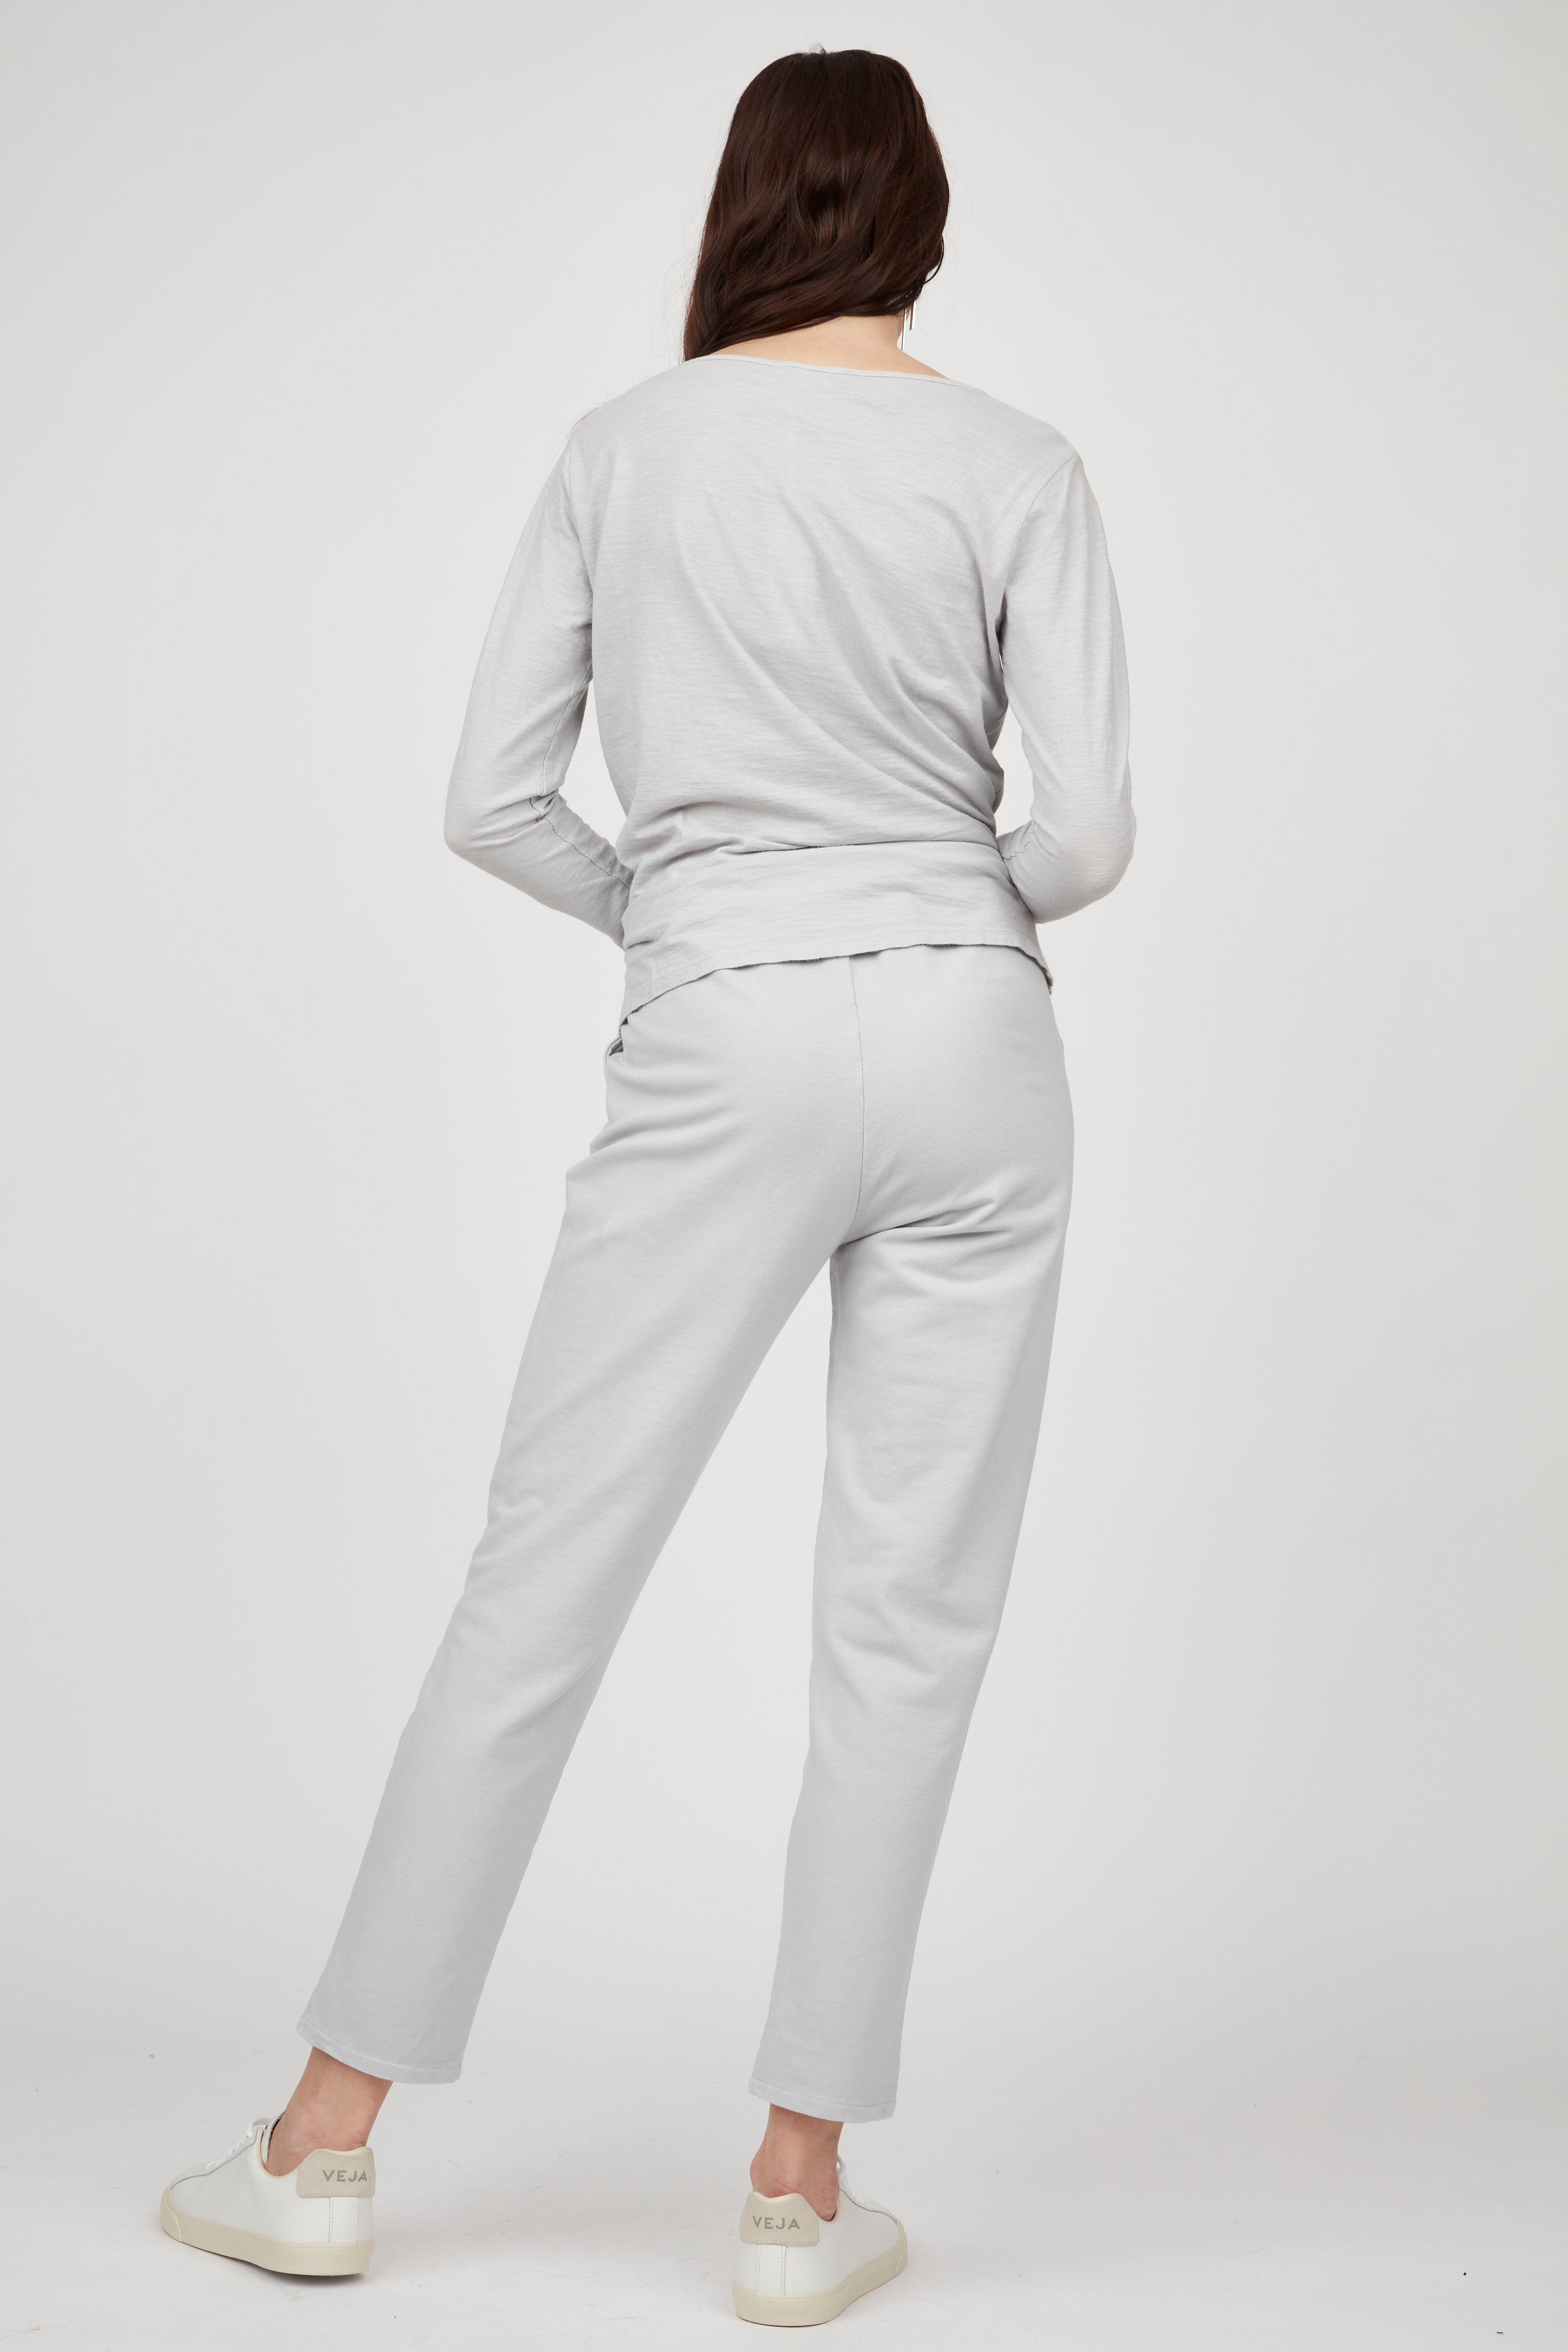 Slim Cut Jogger Pant in Terry Cotton